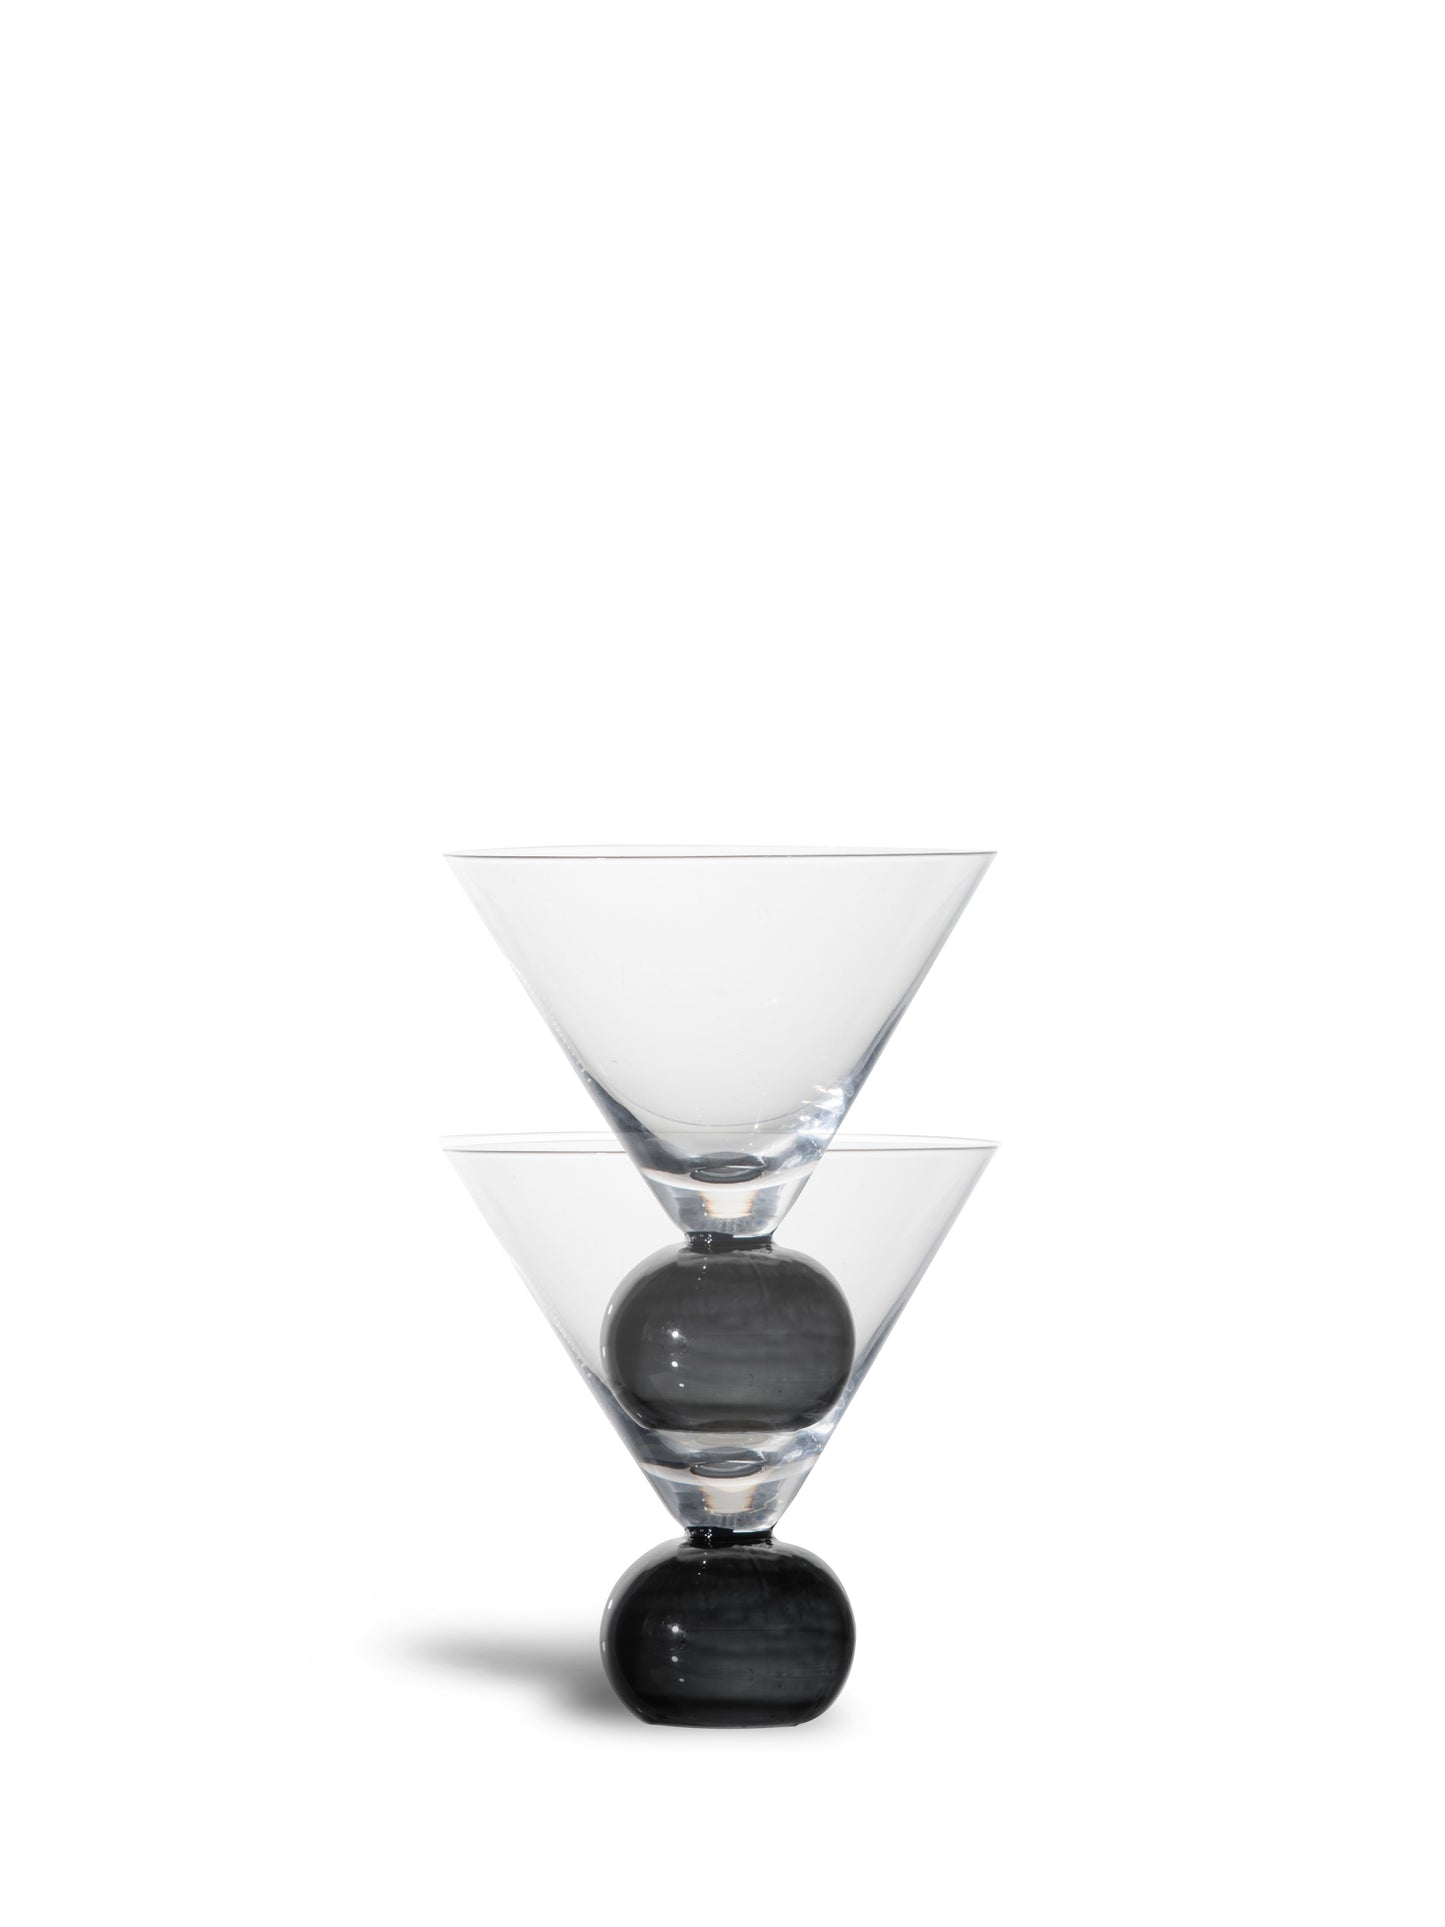 ByON by Widgeteer Spice Martini Glasses, Set of 2